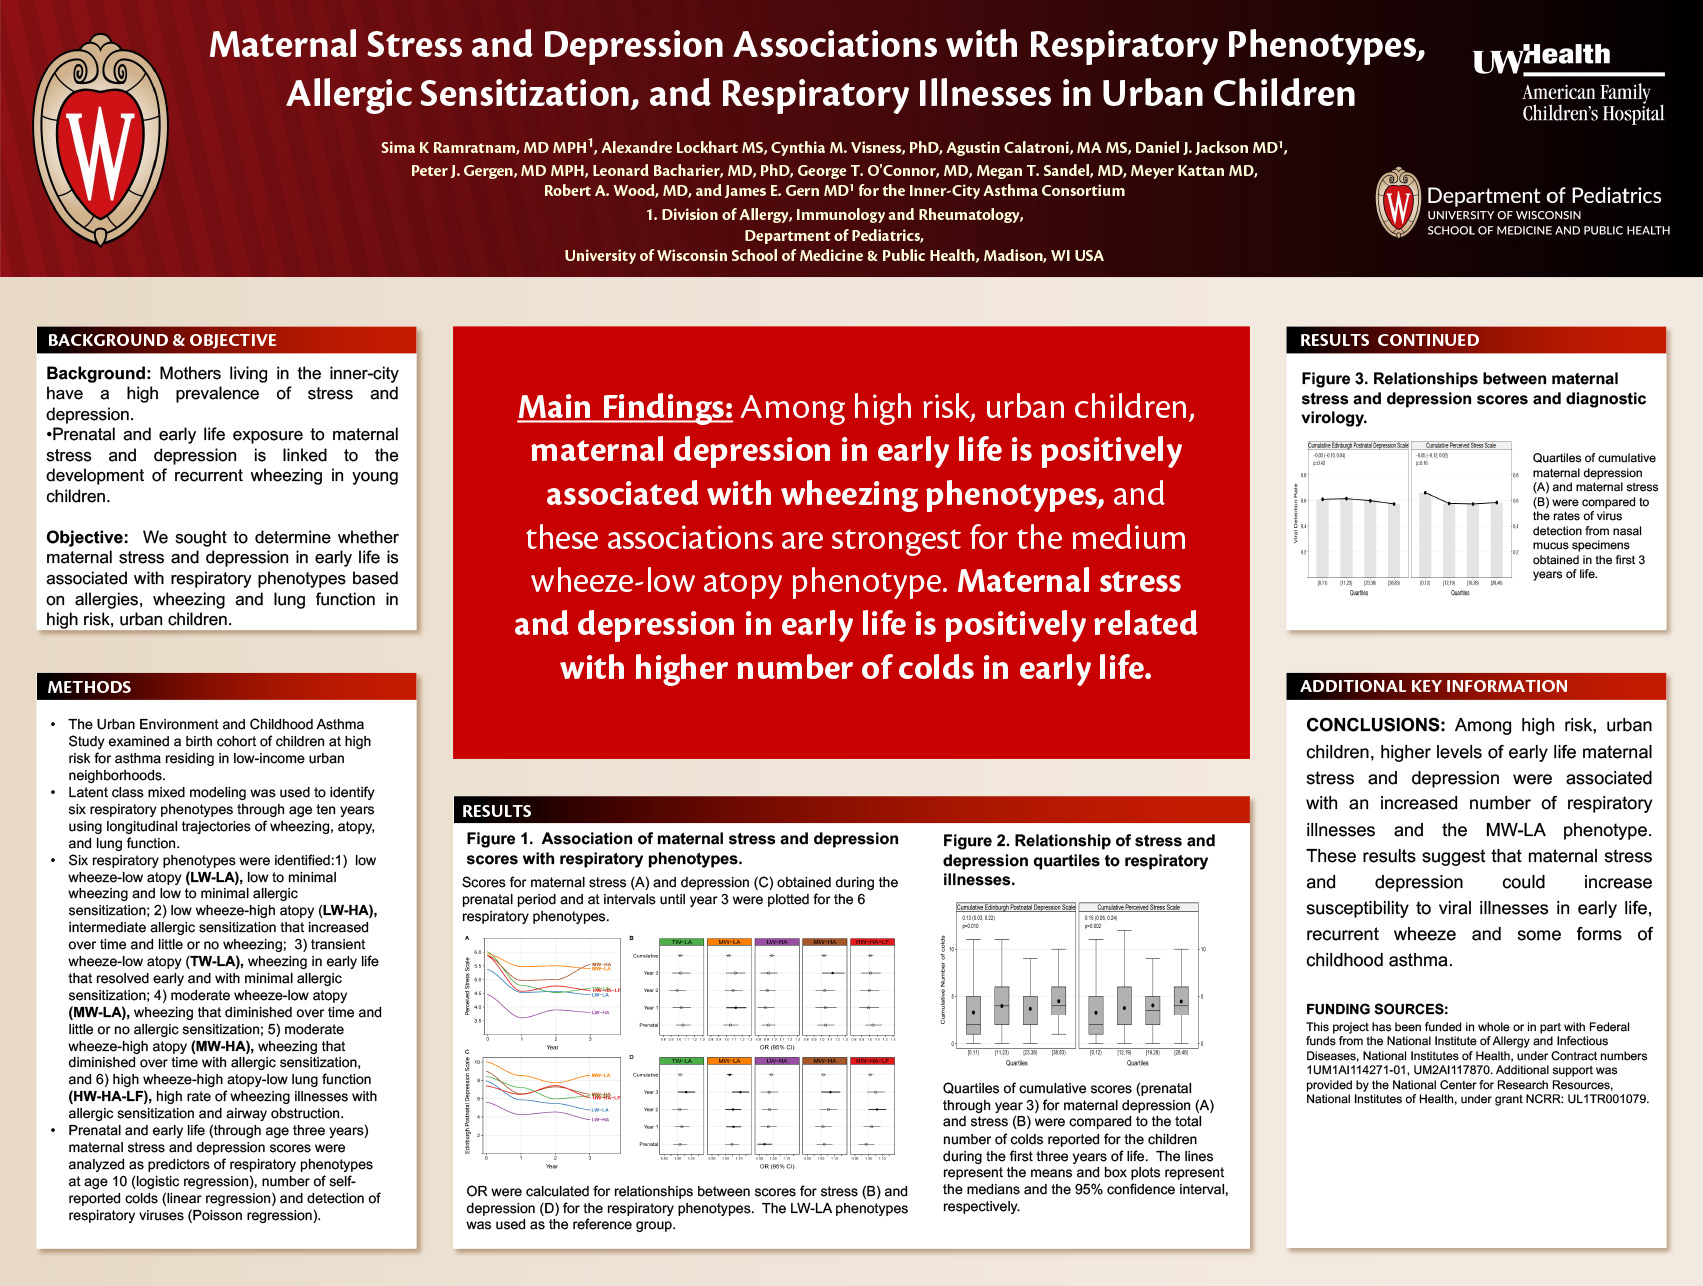 Maternal Stress And Depression Associations With Respiratory Viral Illnesses And Respiratory Phenotypes poster image